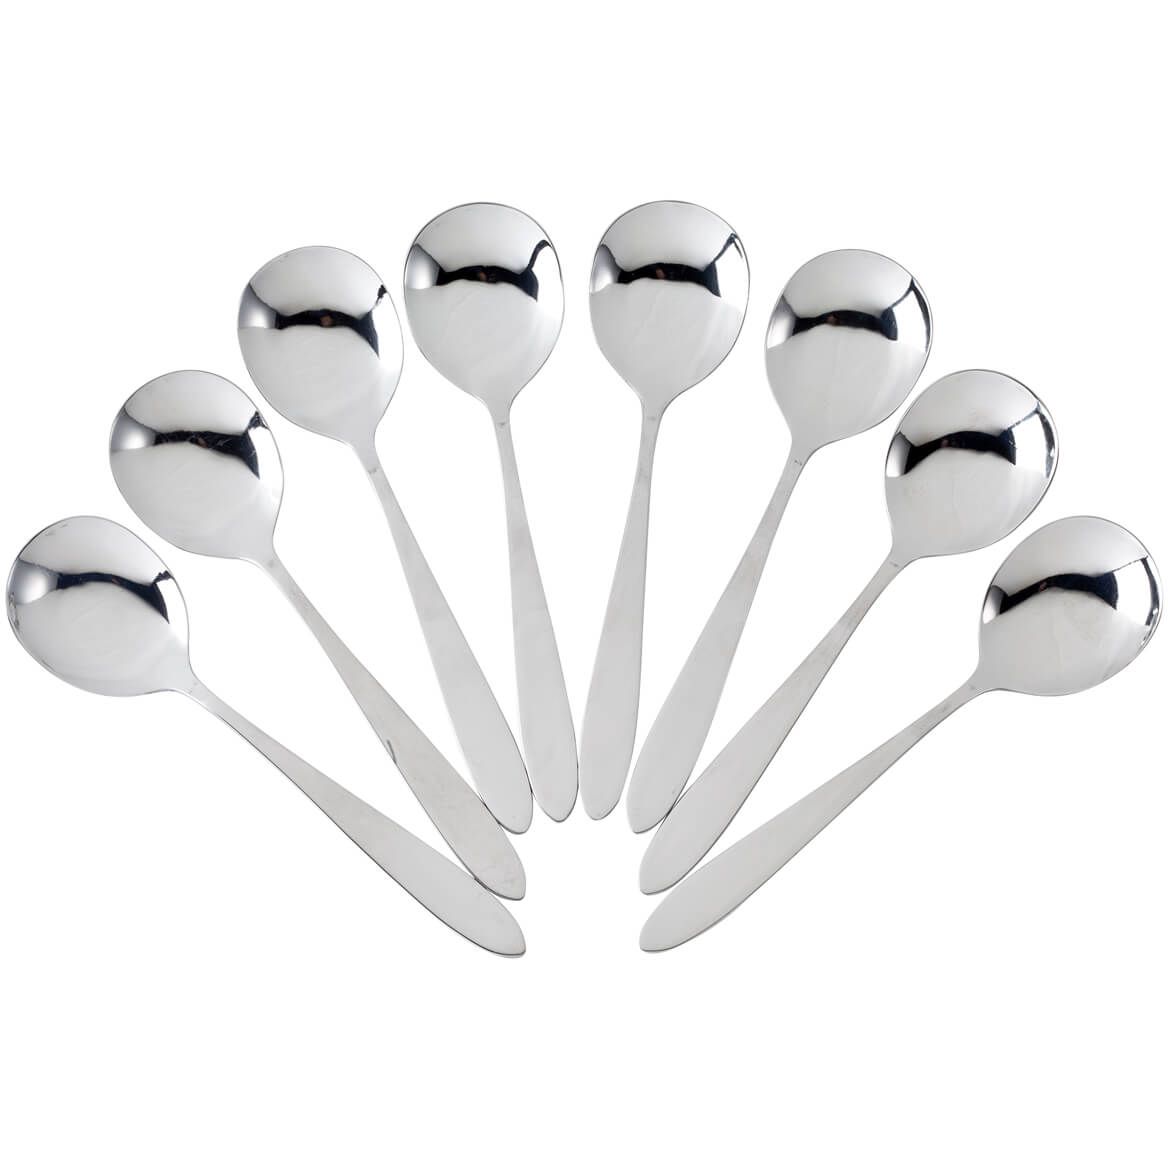 Soup Spoons - Set of 8 + '-' + 348291